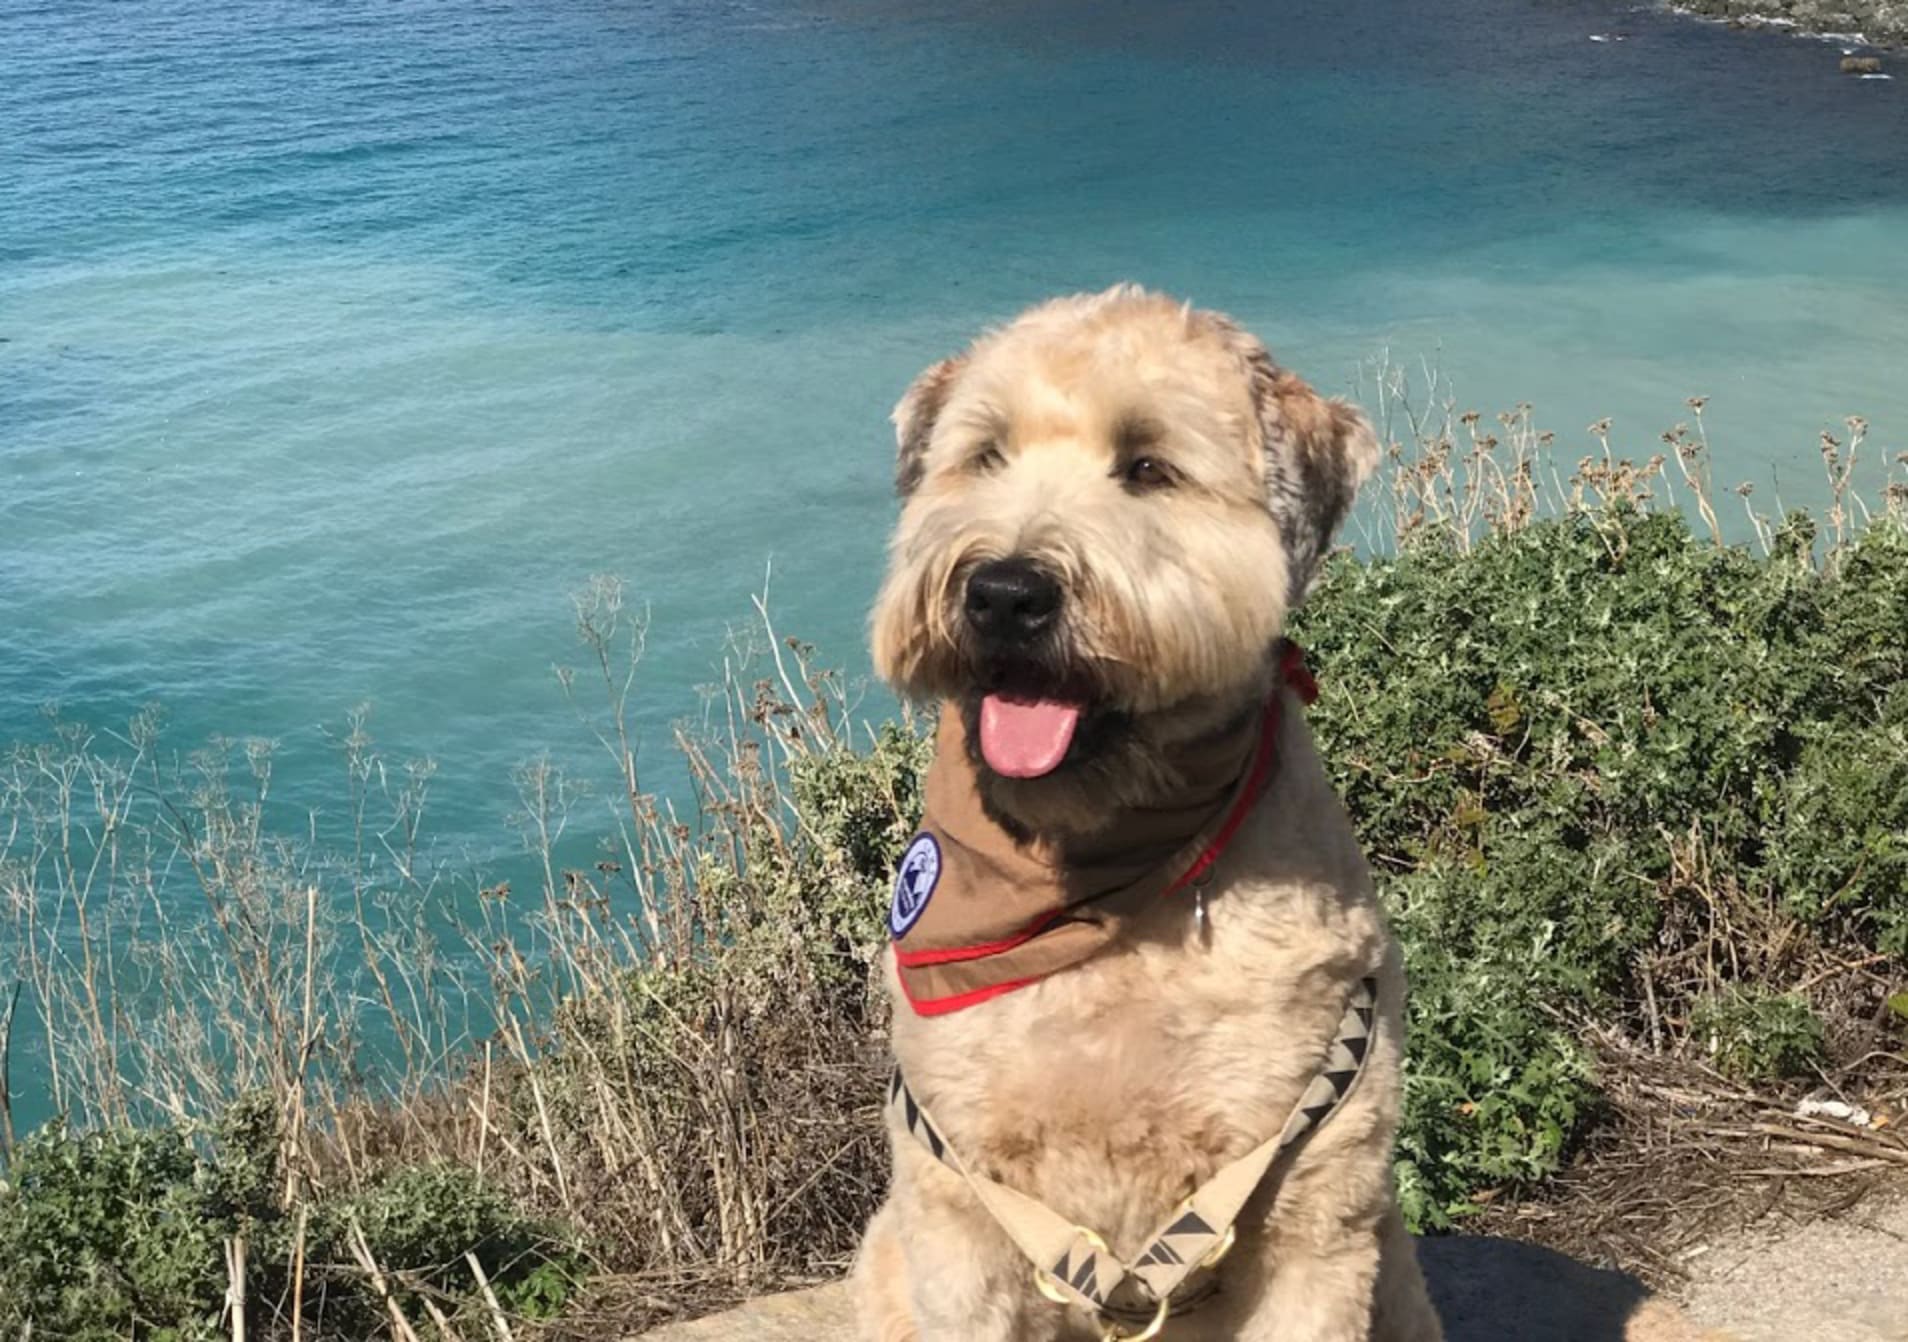 Hipcamper of the Week: Topher the Wheaten Terrier